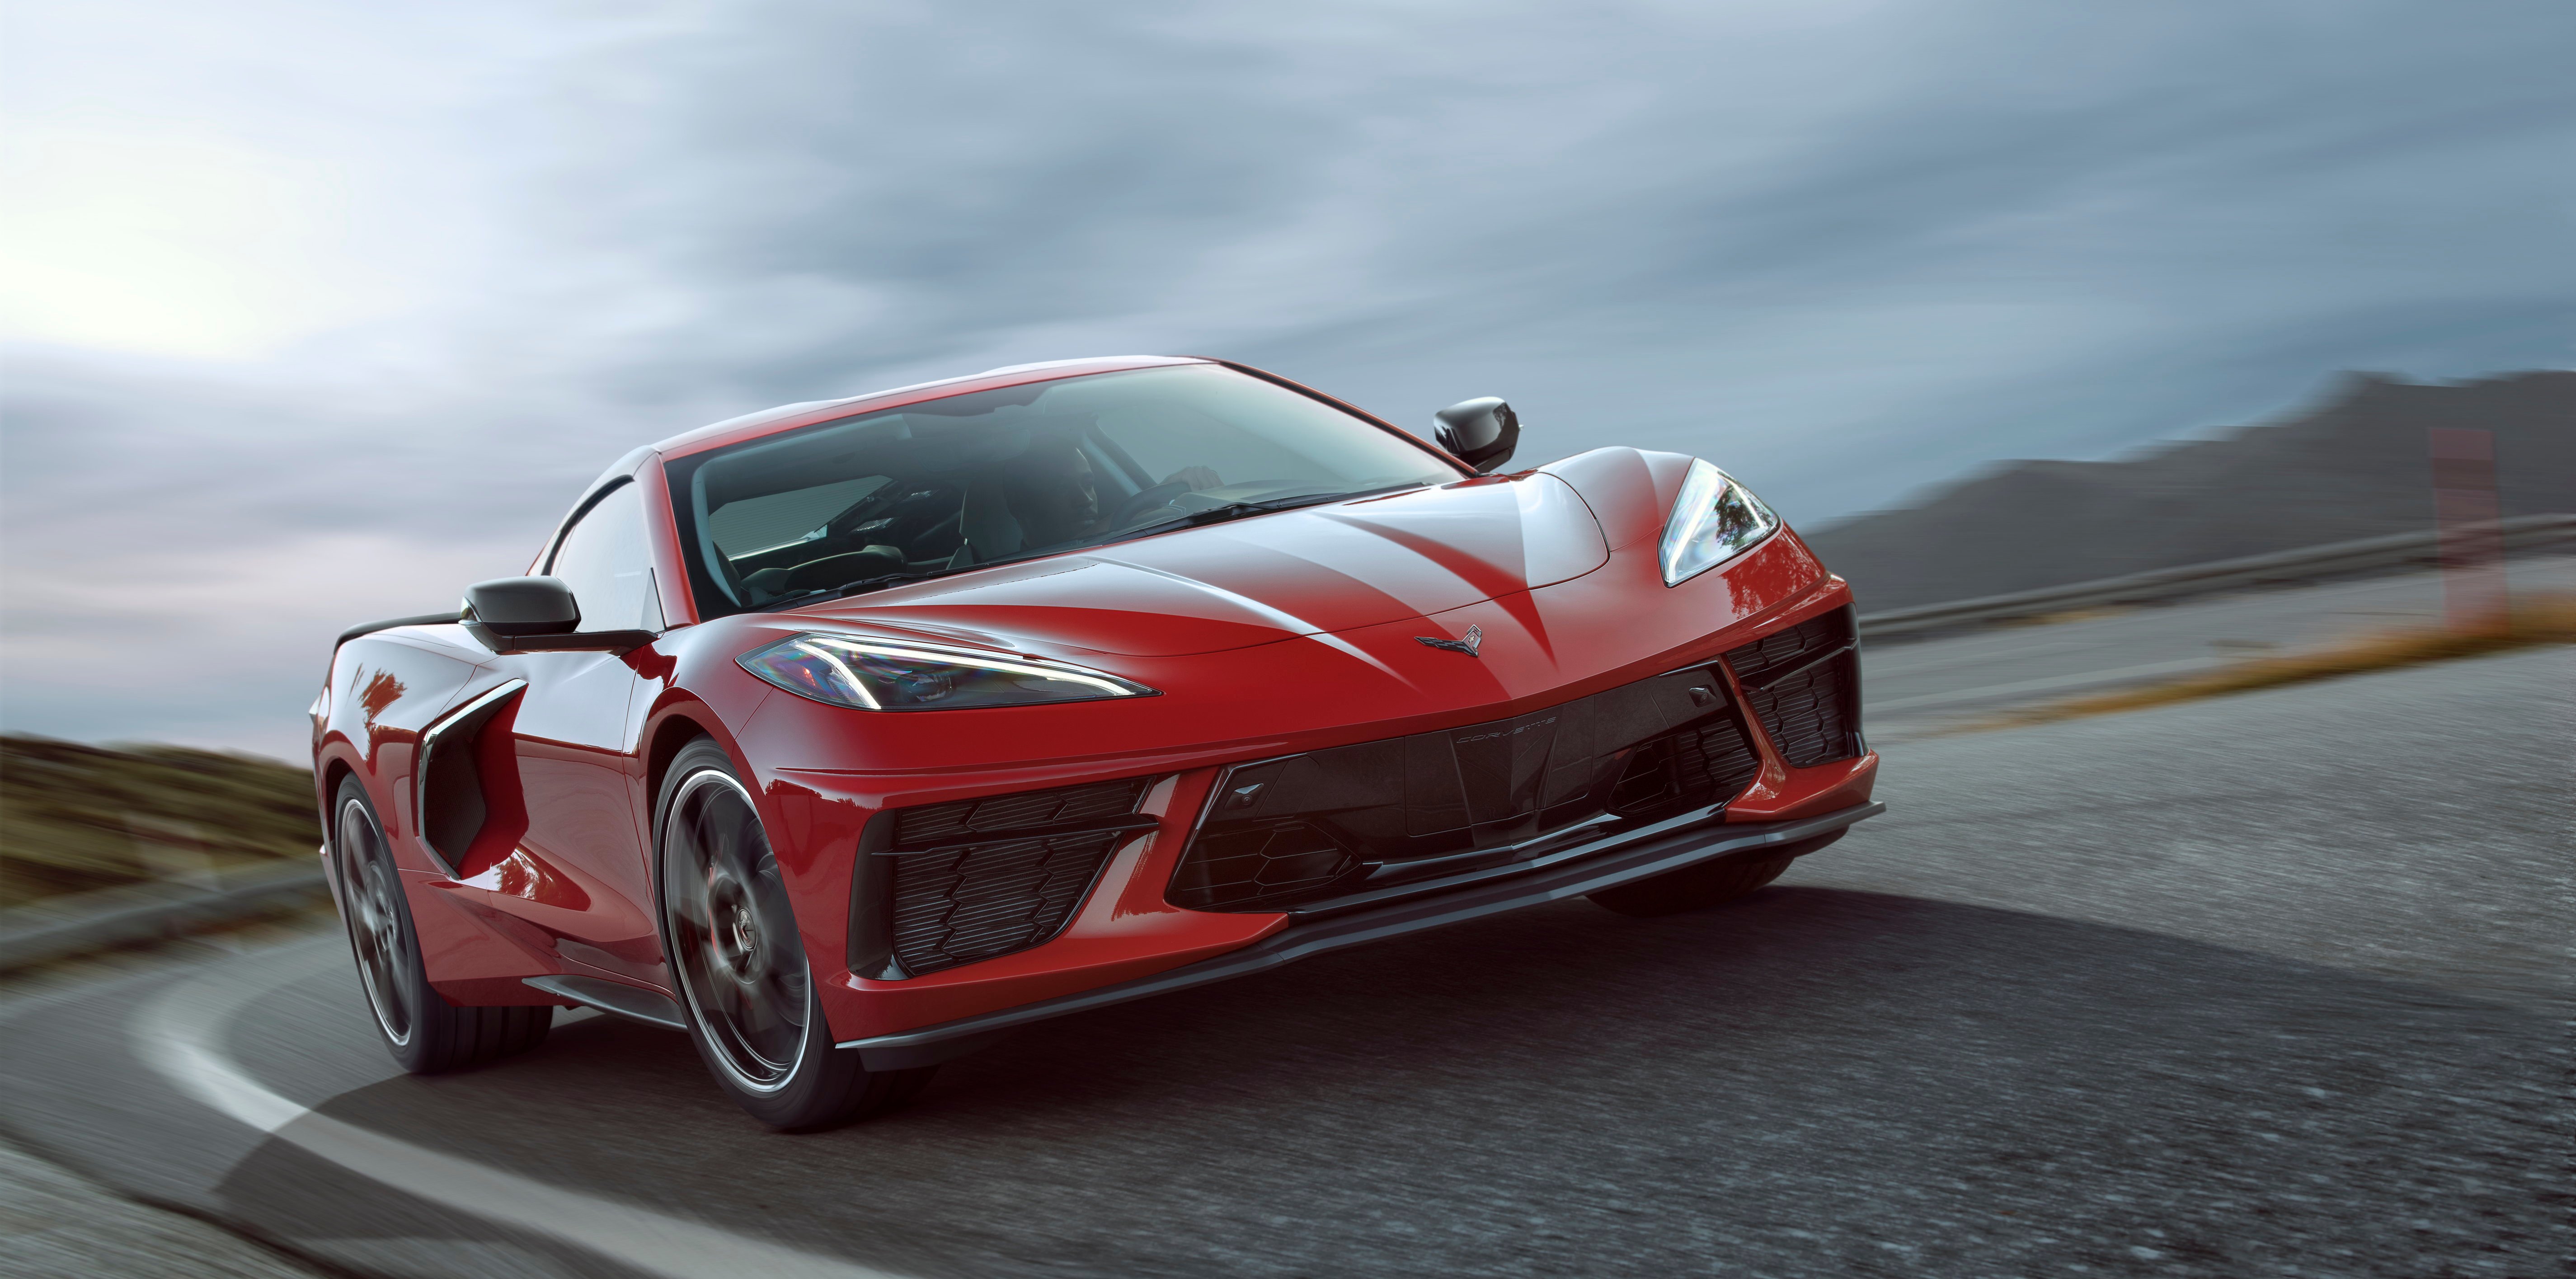 Chevy C8 Corvette And Facts Picture, Photo